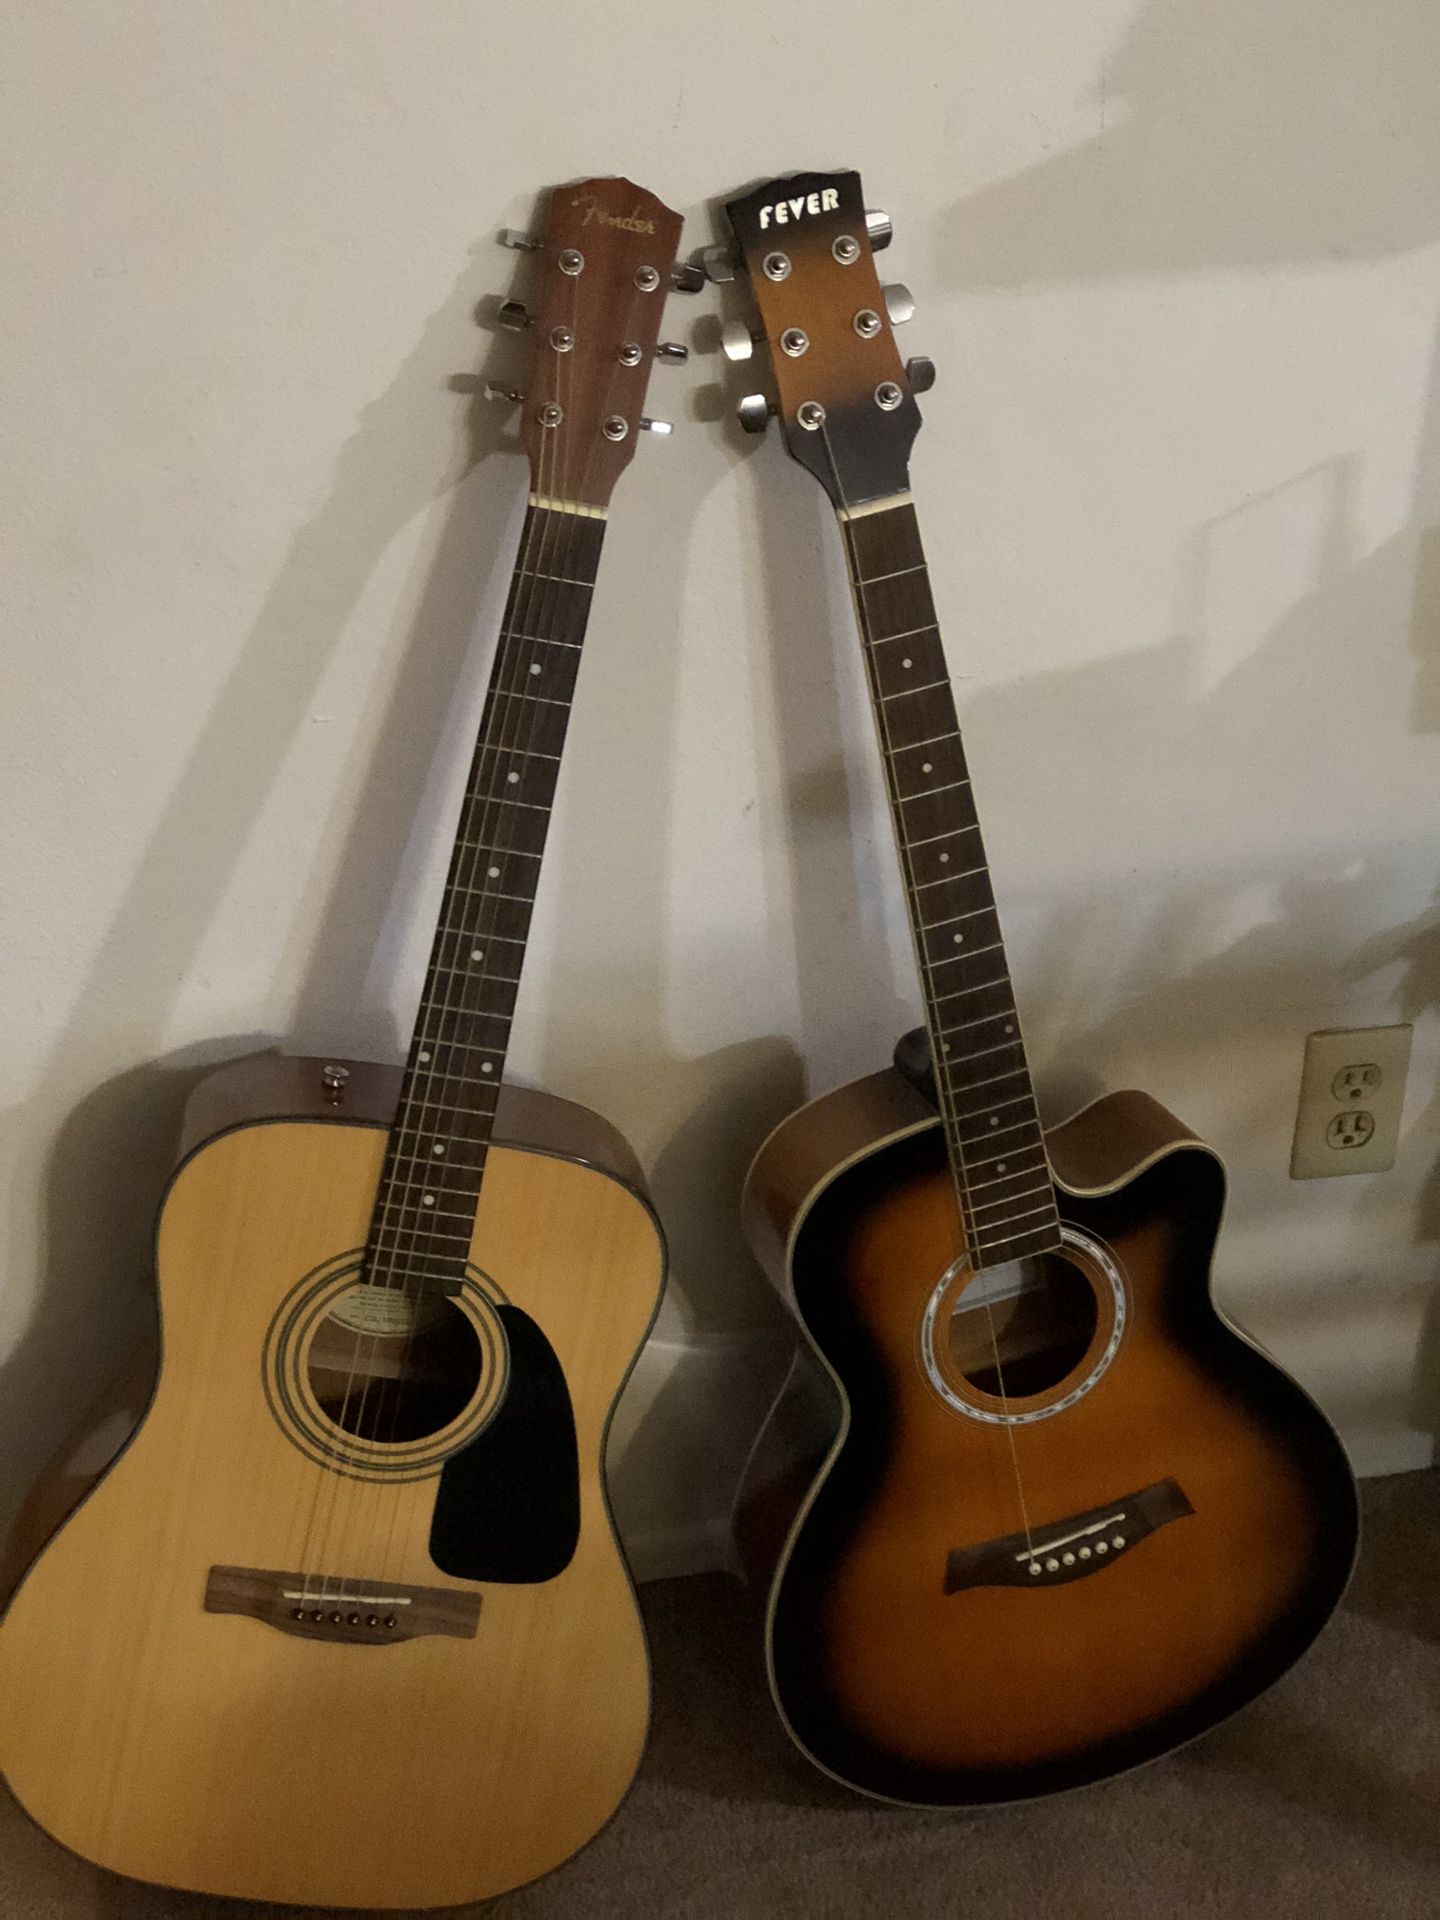 Guitars Fender And Fever Whith Piano 